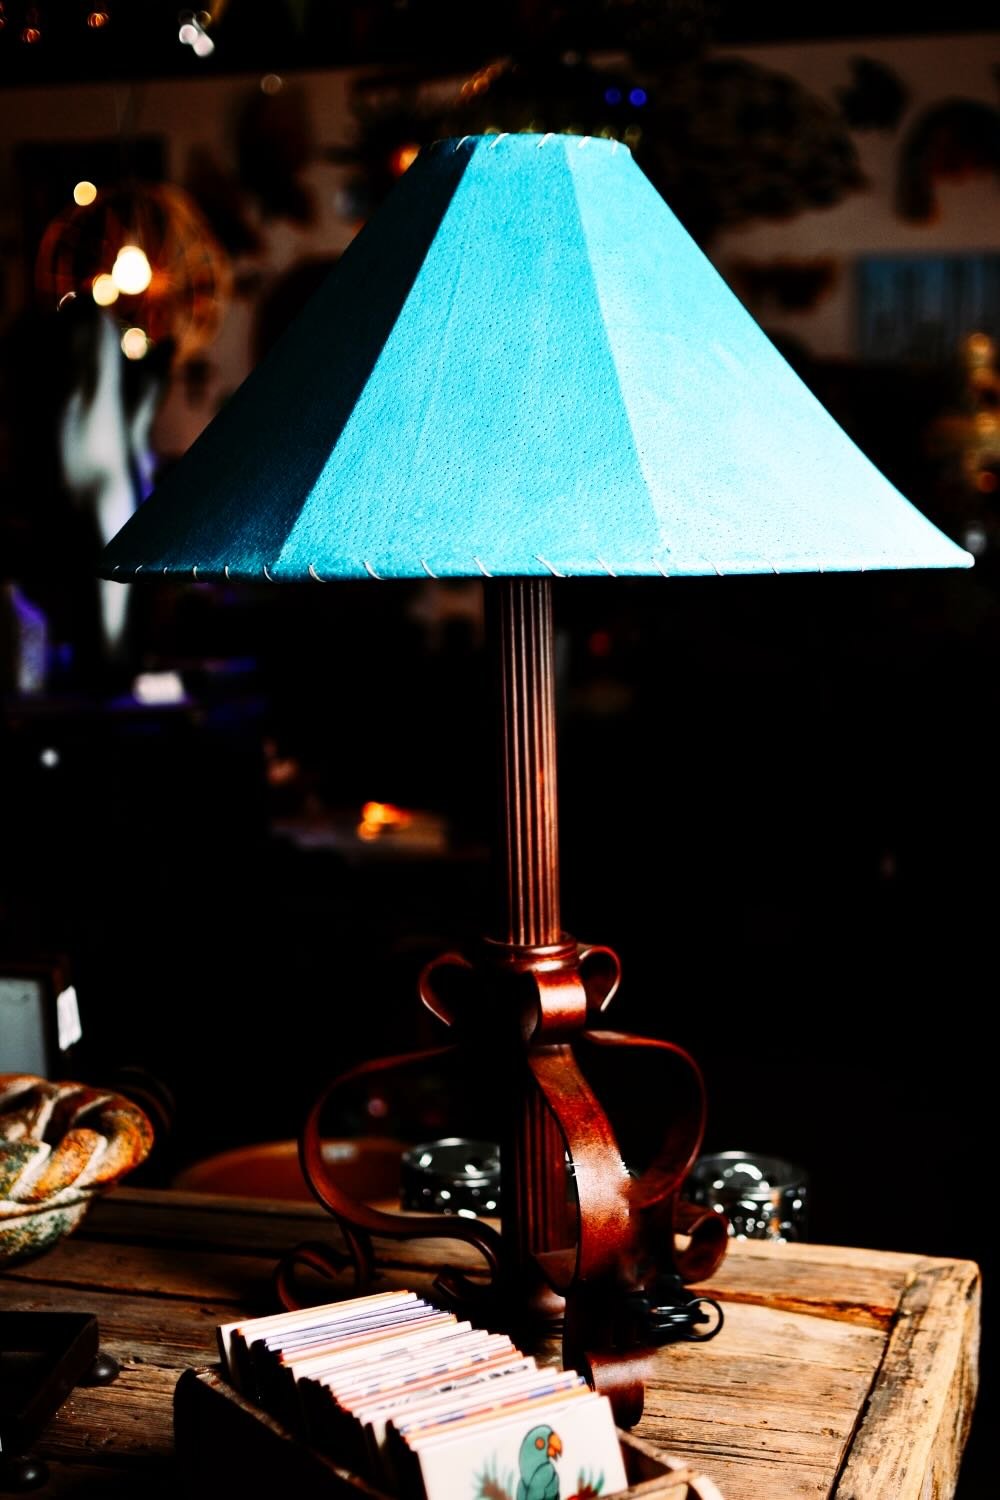 Wrought Iron Lamp with Turquoise Pigskin Lamp Shade